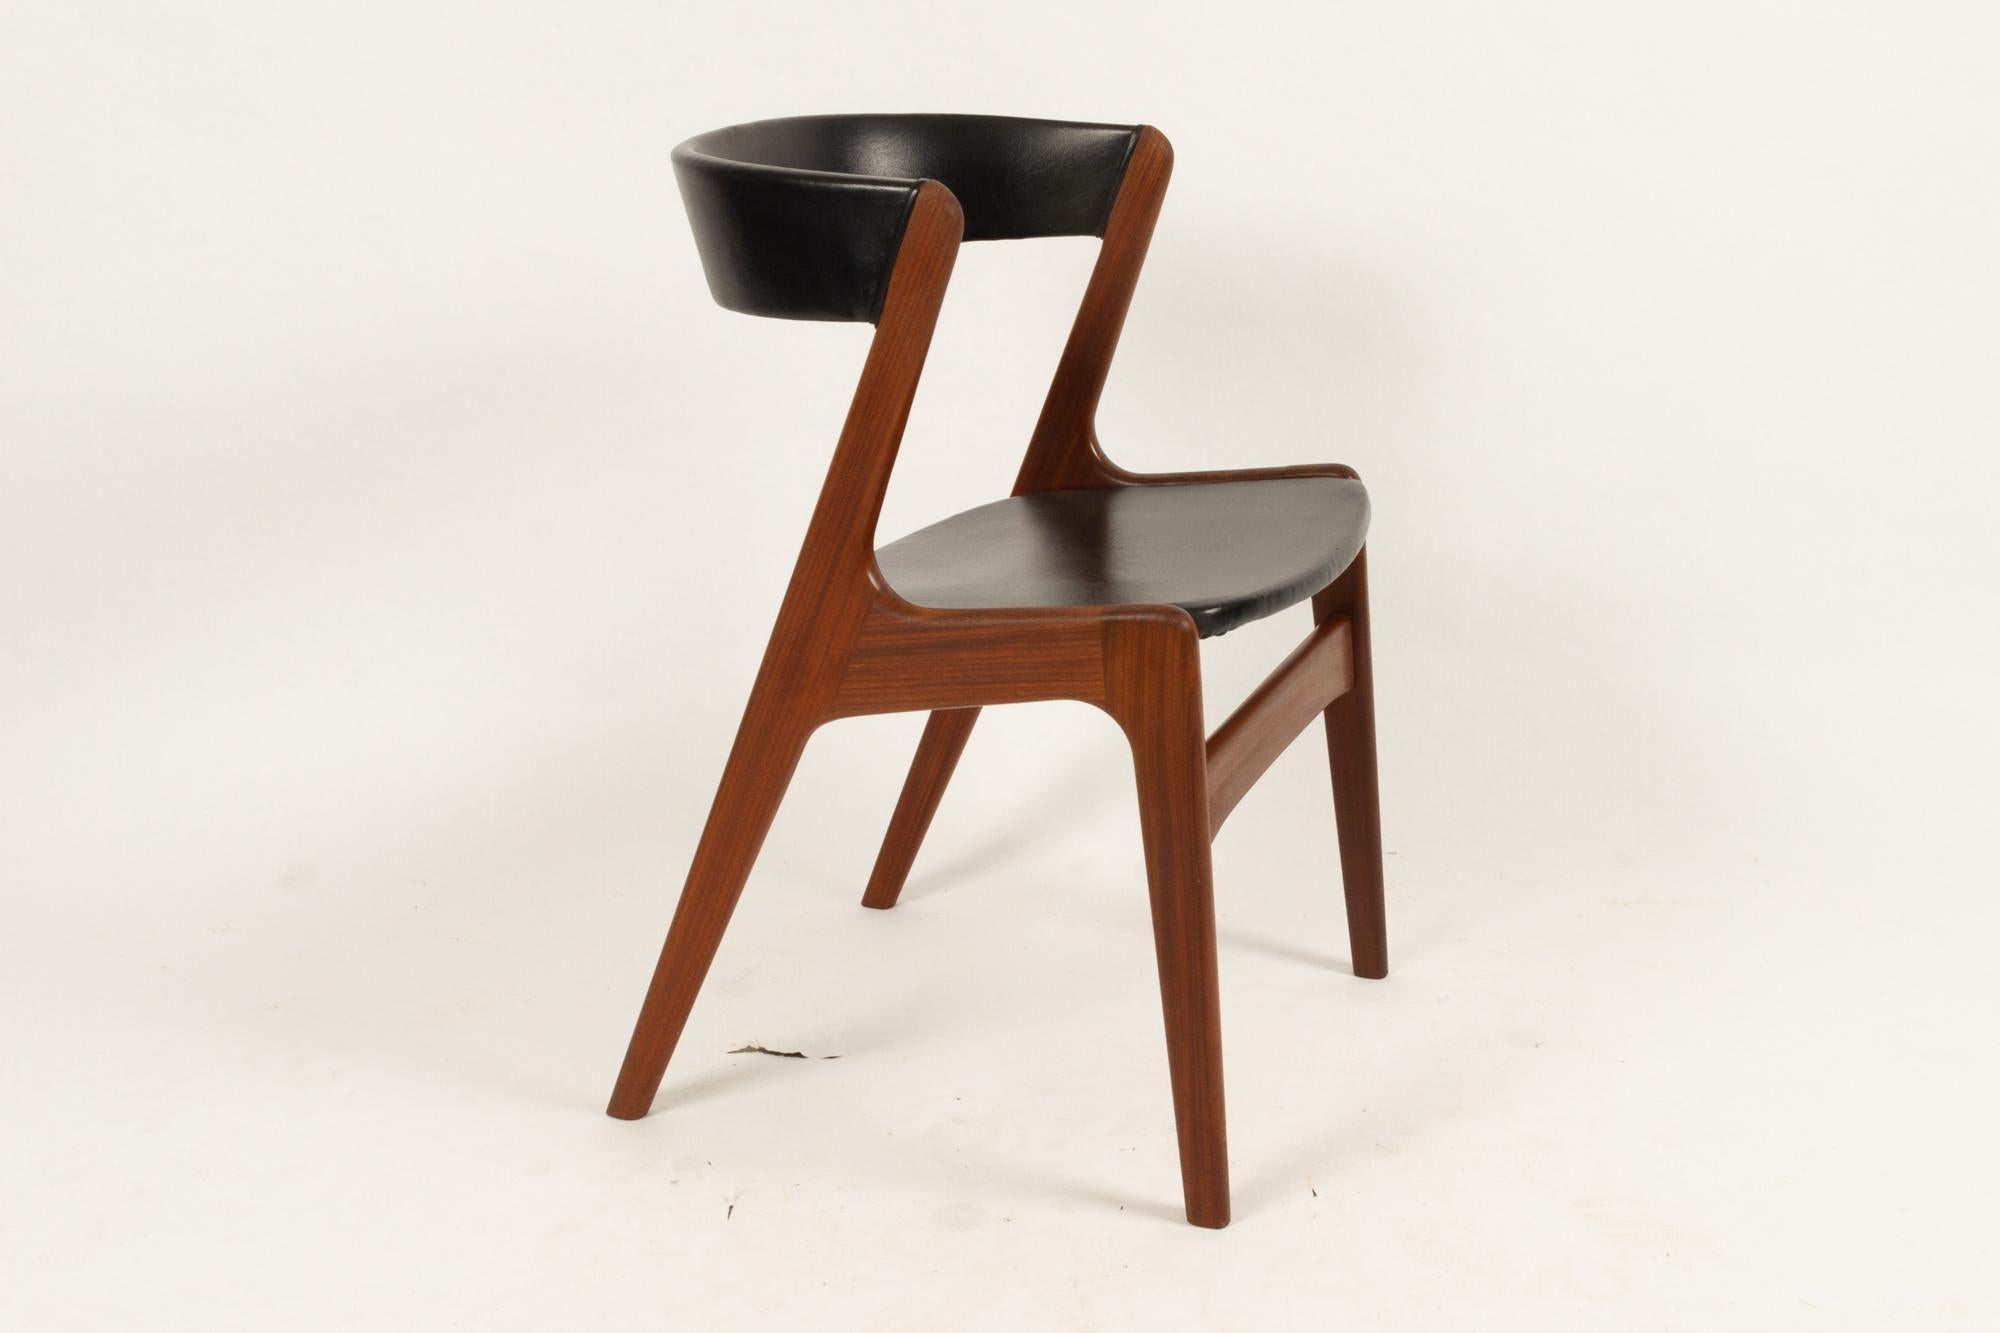 Danish chair in solid teak, 1960s
Mid-Century Modern Danish side, desk or dining chair in solid teak and original leatherette. Wide curved backrest, and rounded tapering legs. Sloping back legs gives this chair a distinct and easily recognizable